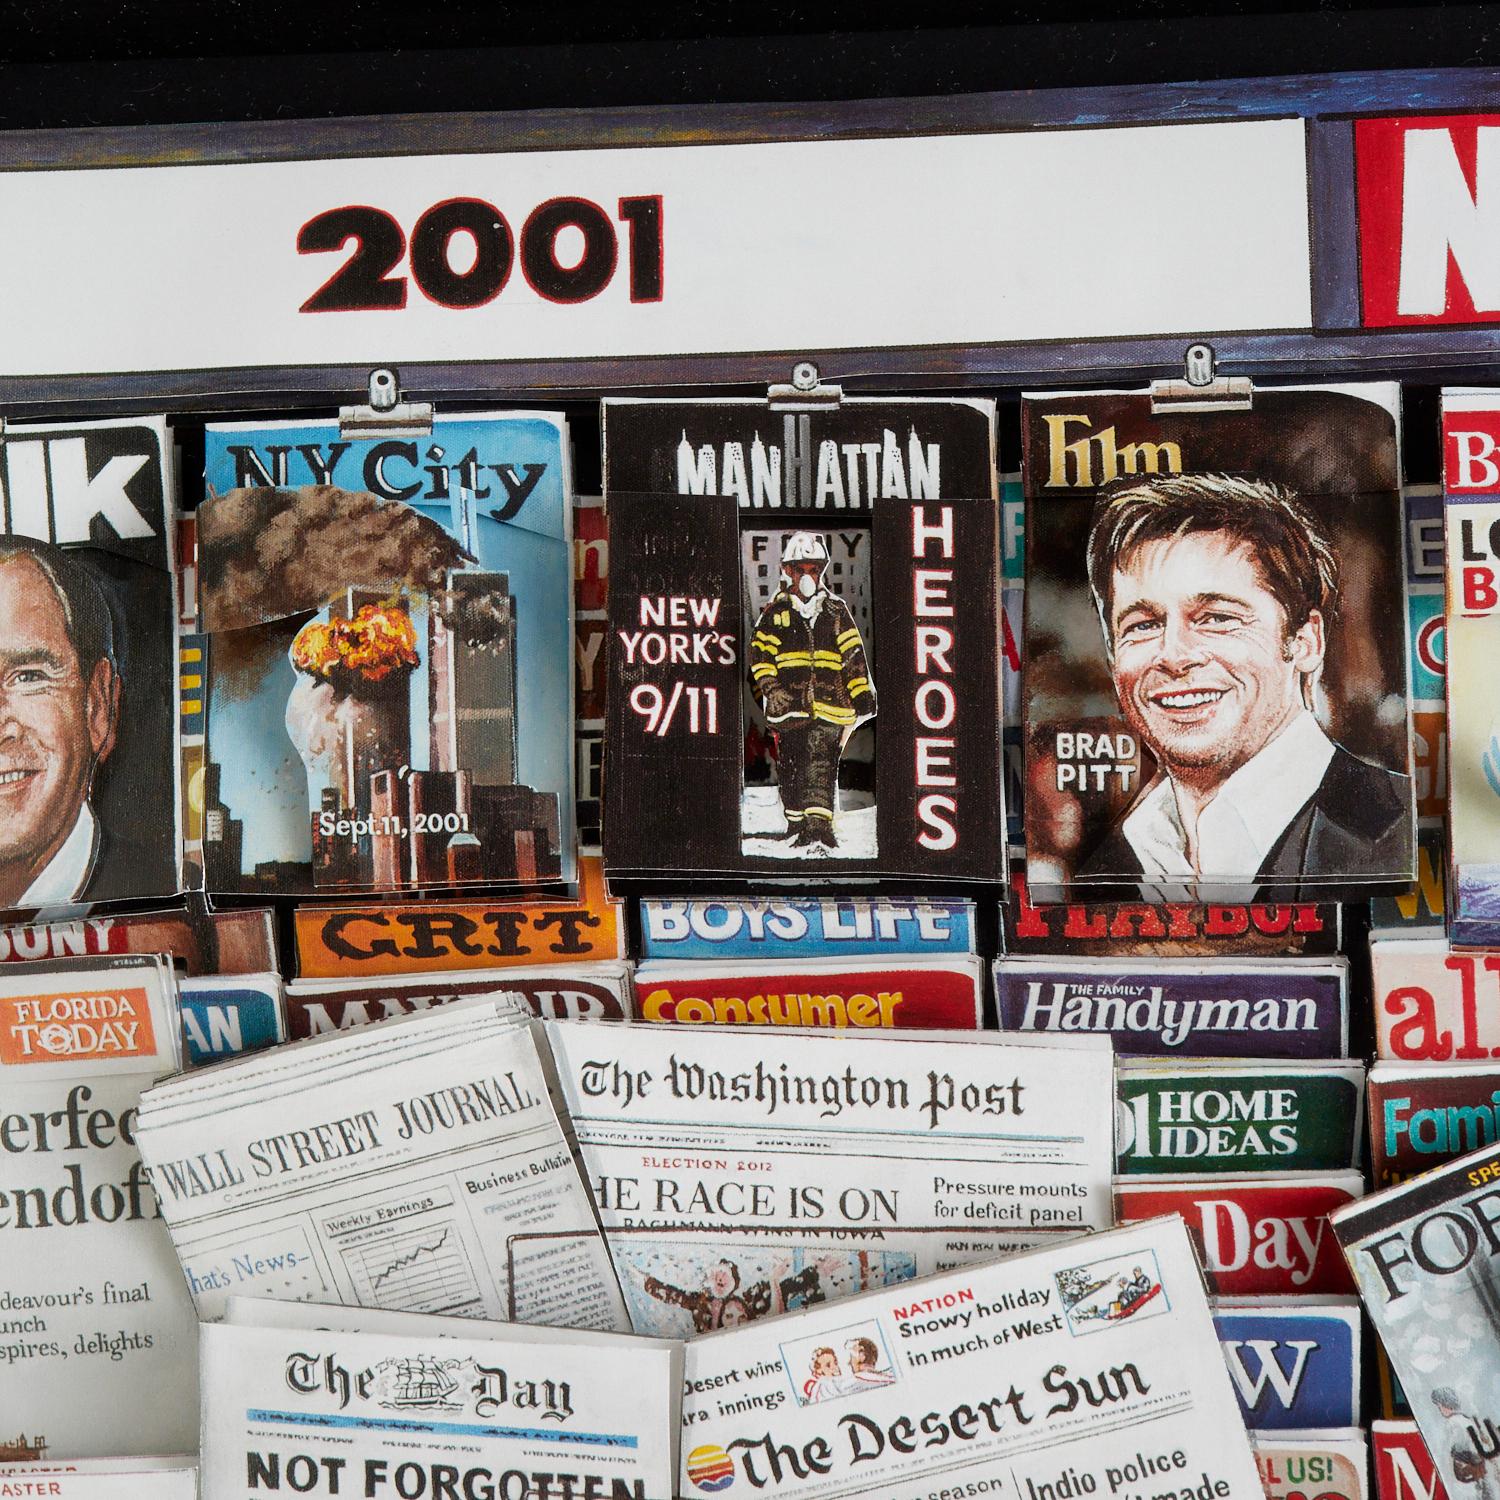 Ken Keeley (American, 1934-2020), mixed media 3-dimensional collage of newspaper and magazine covers of the decade, signed 